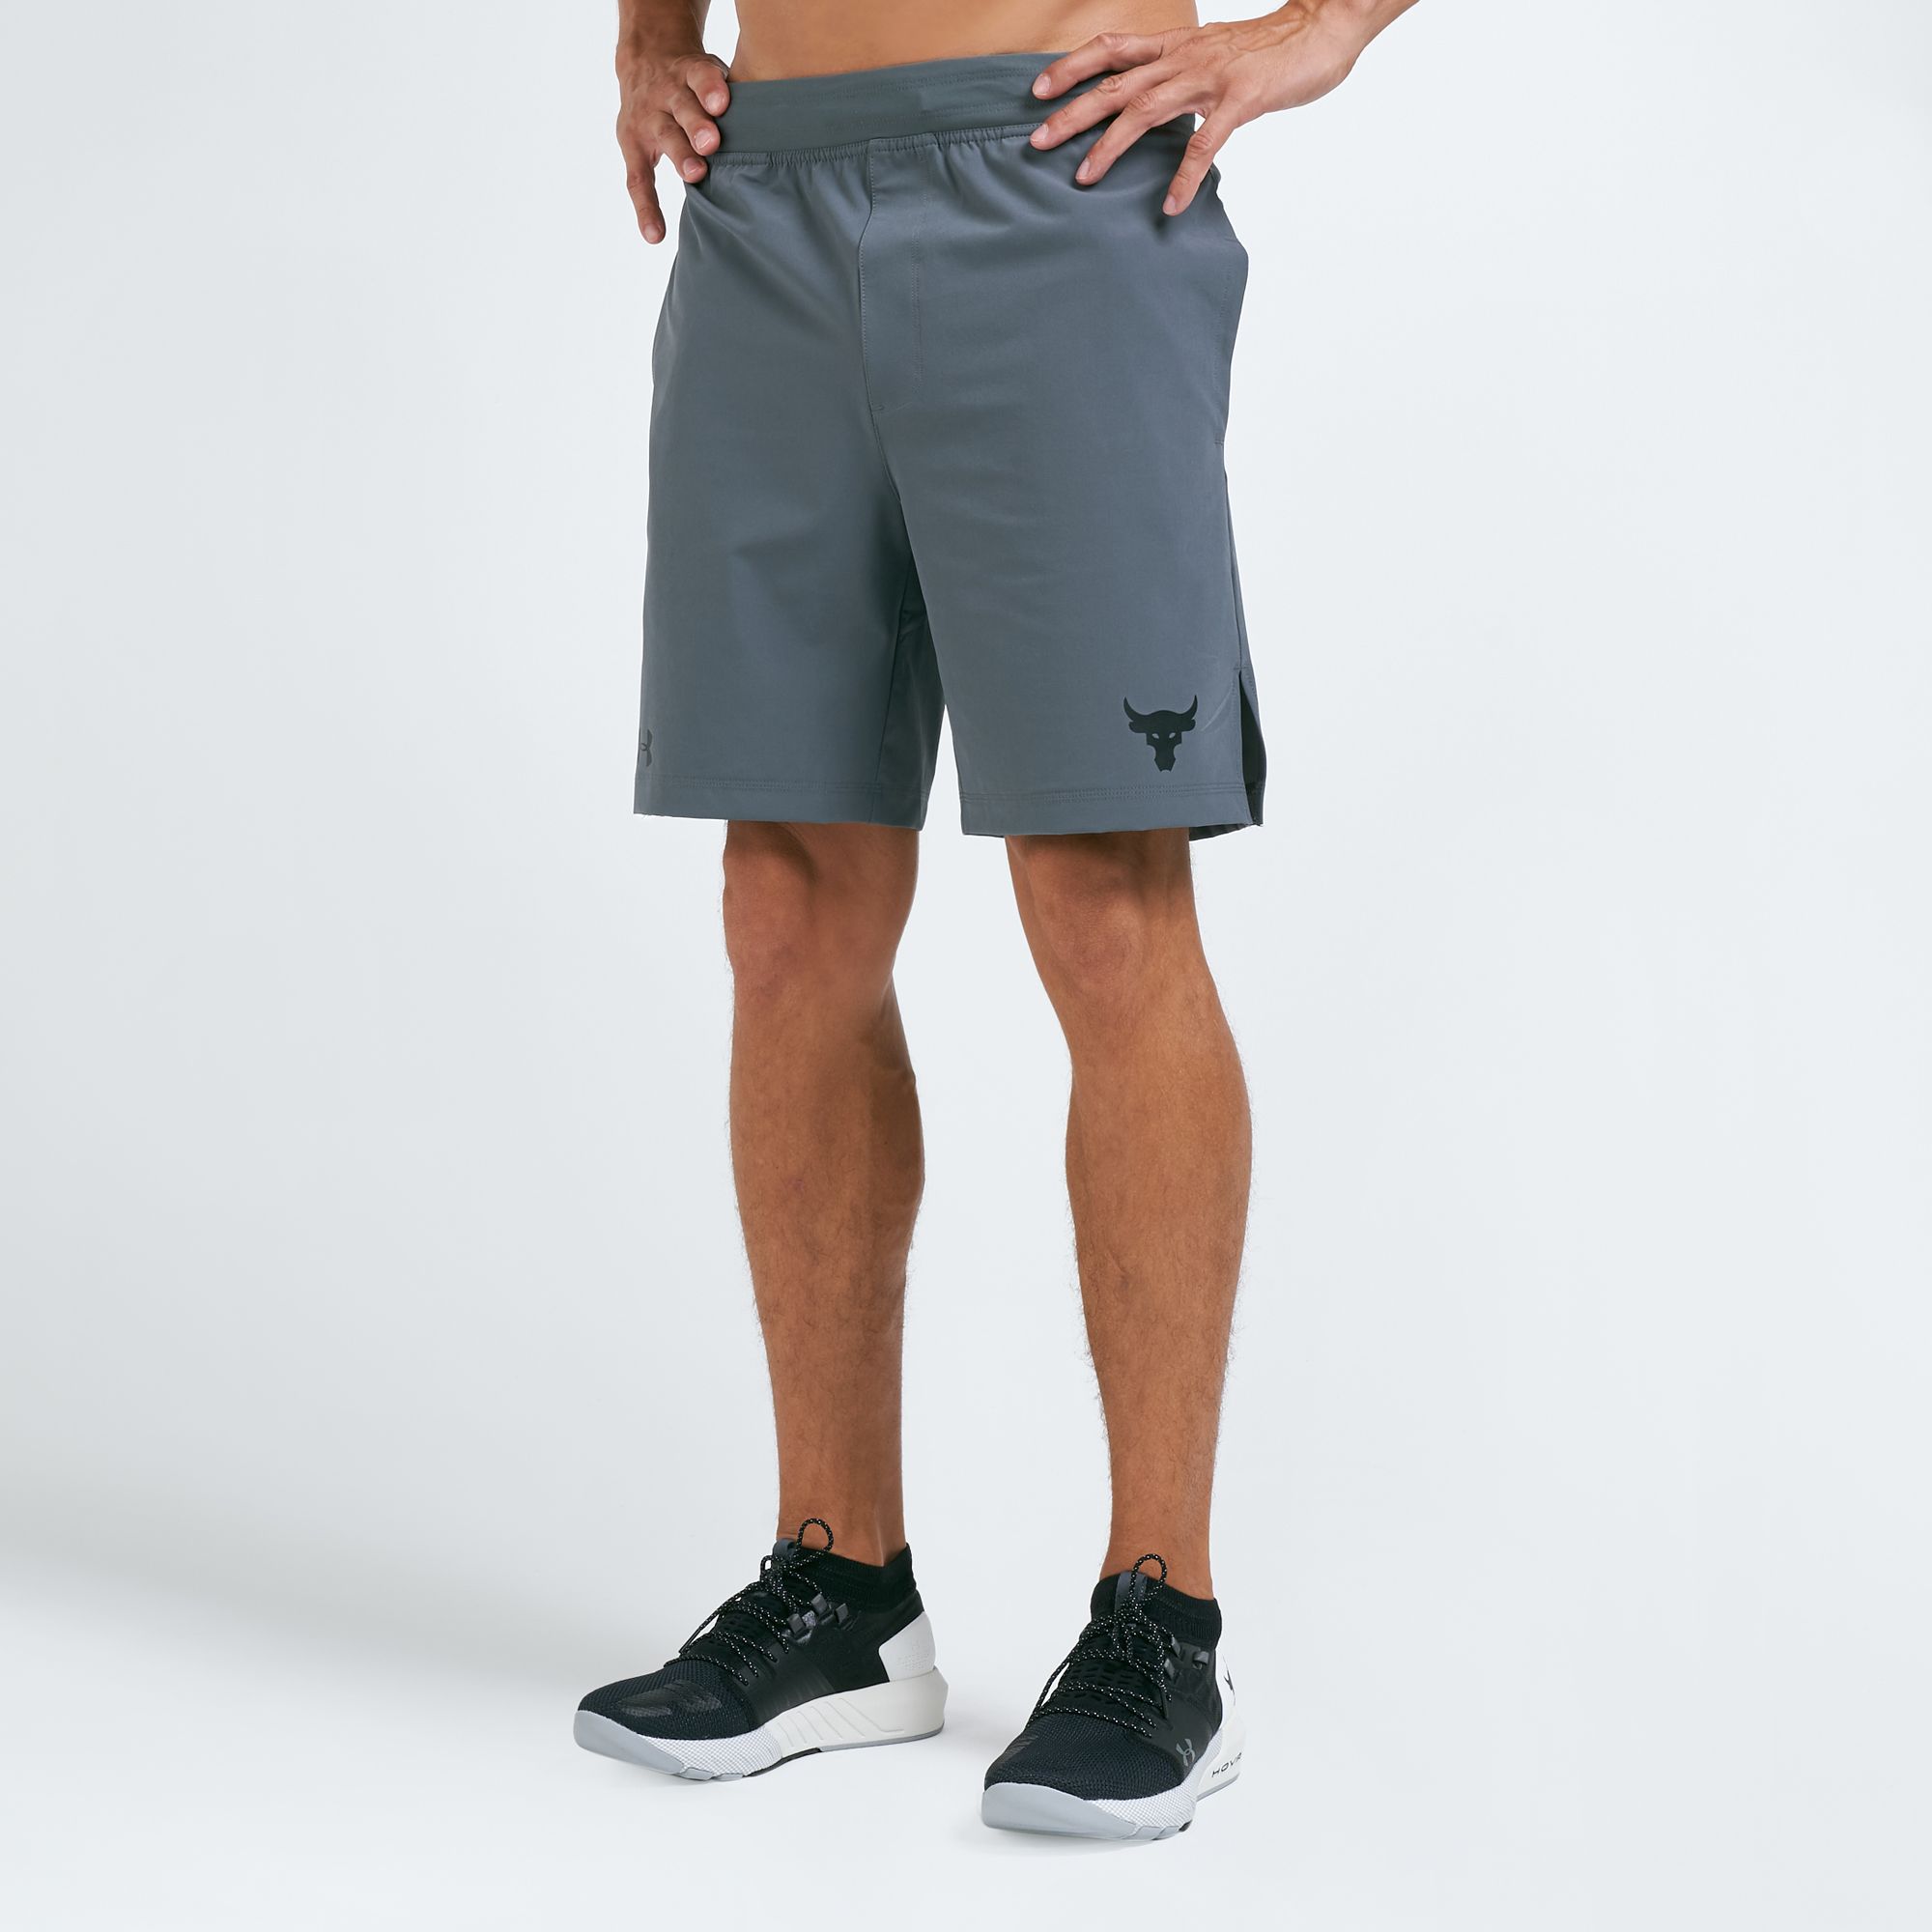 project rock under armour shorts